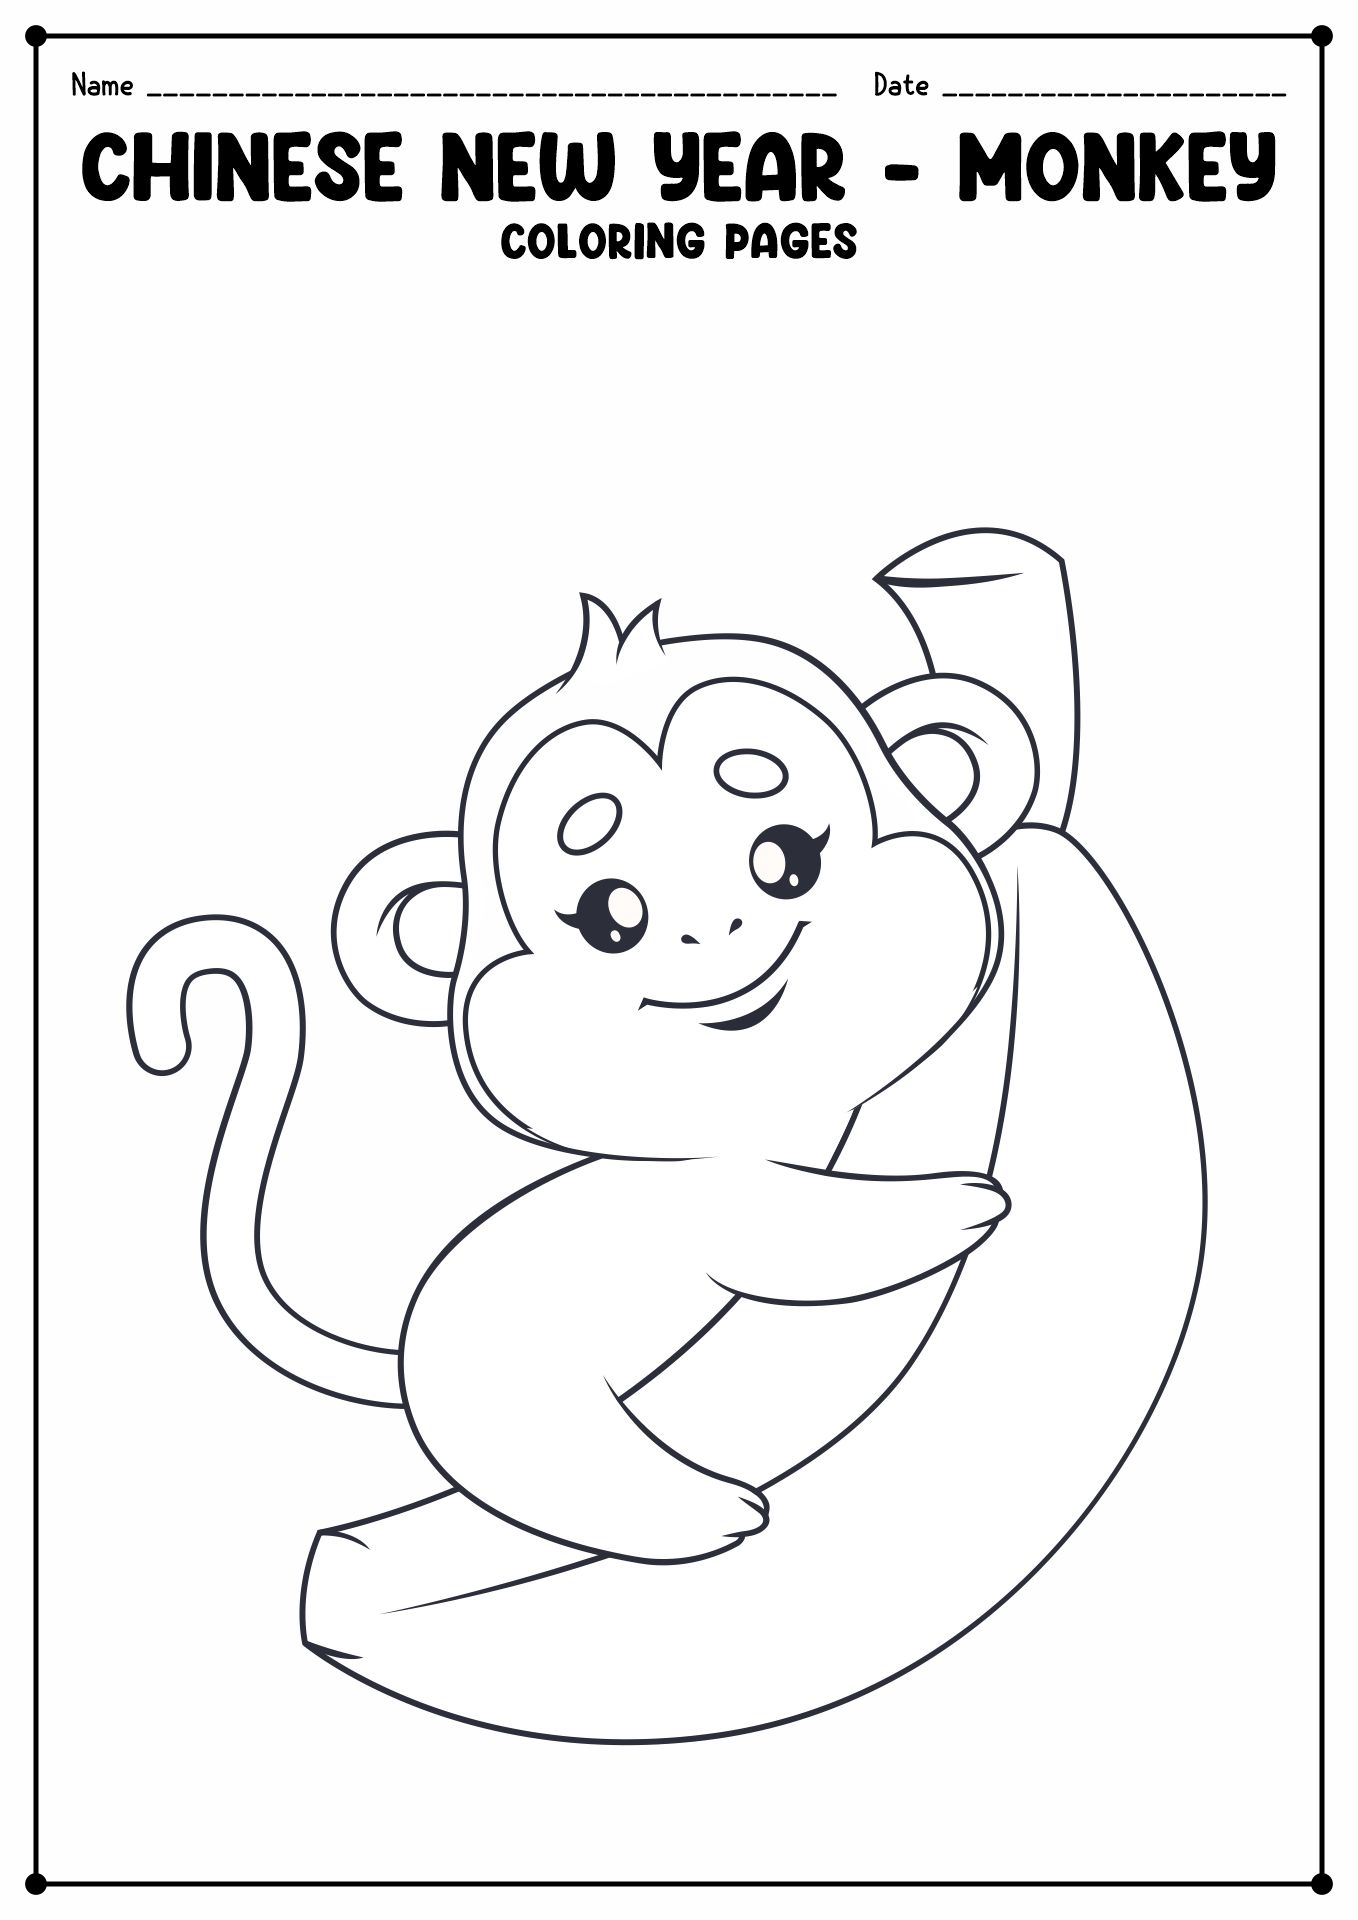 Chinese New Year Coloring Page Monkey Image